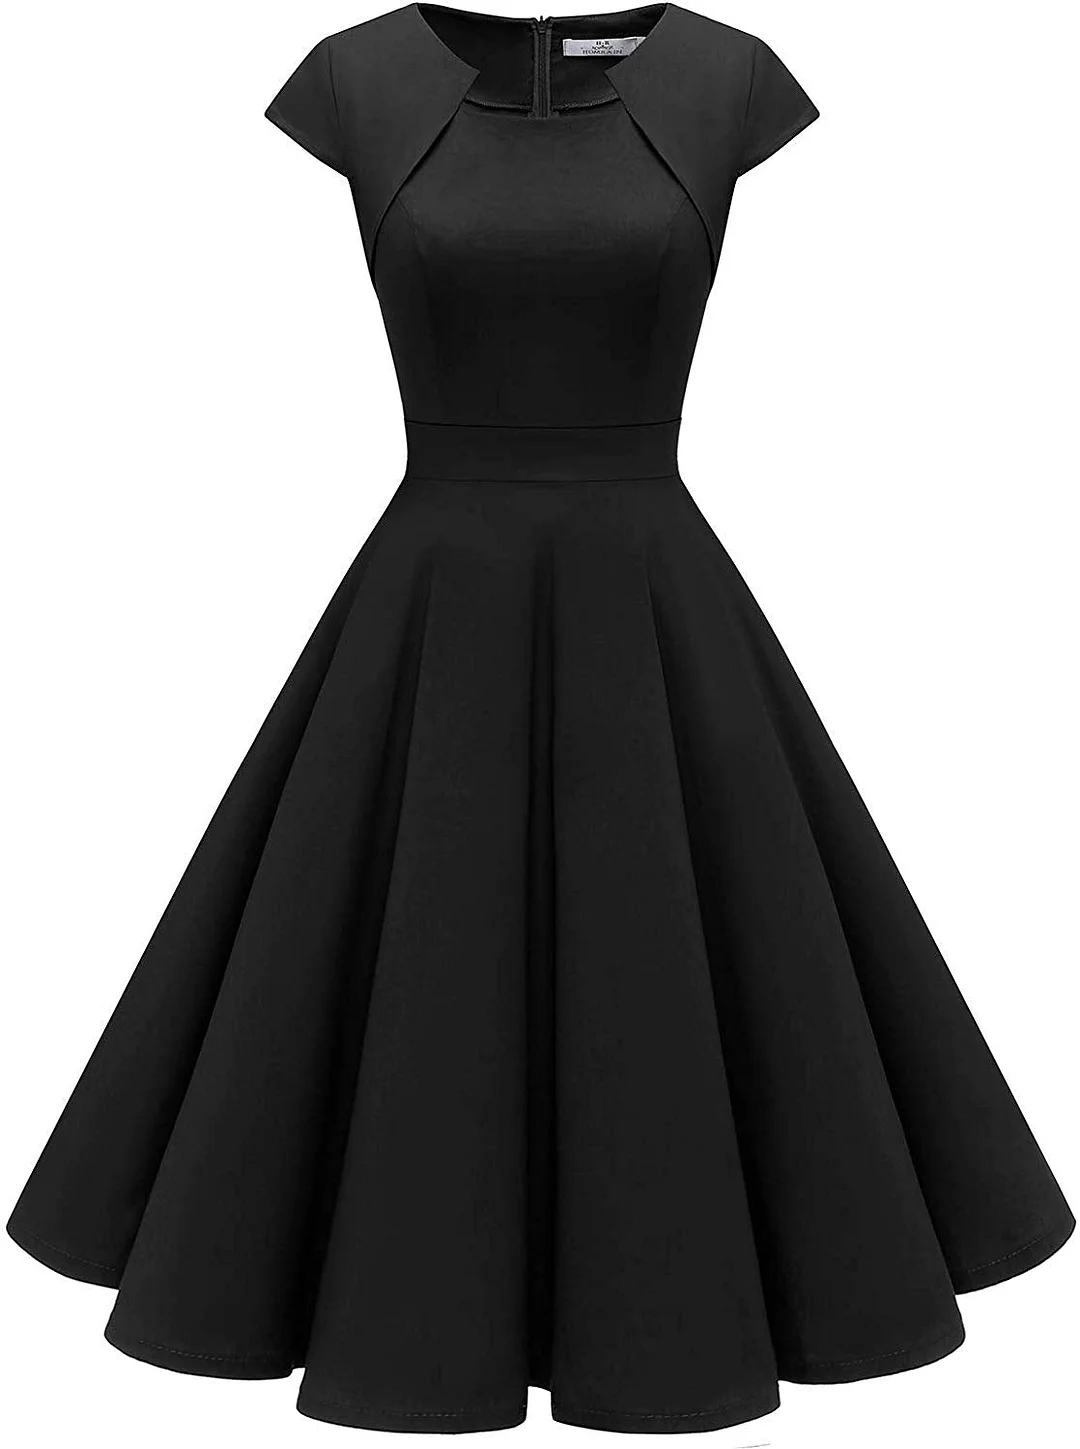 1950s Retro Vintage A-Line Cap Sleeve Cocktail Swing Party Dress for women